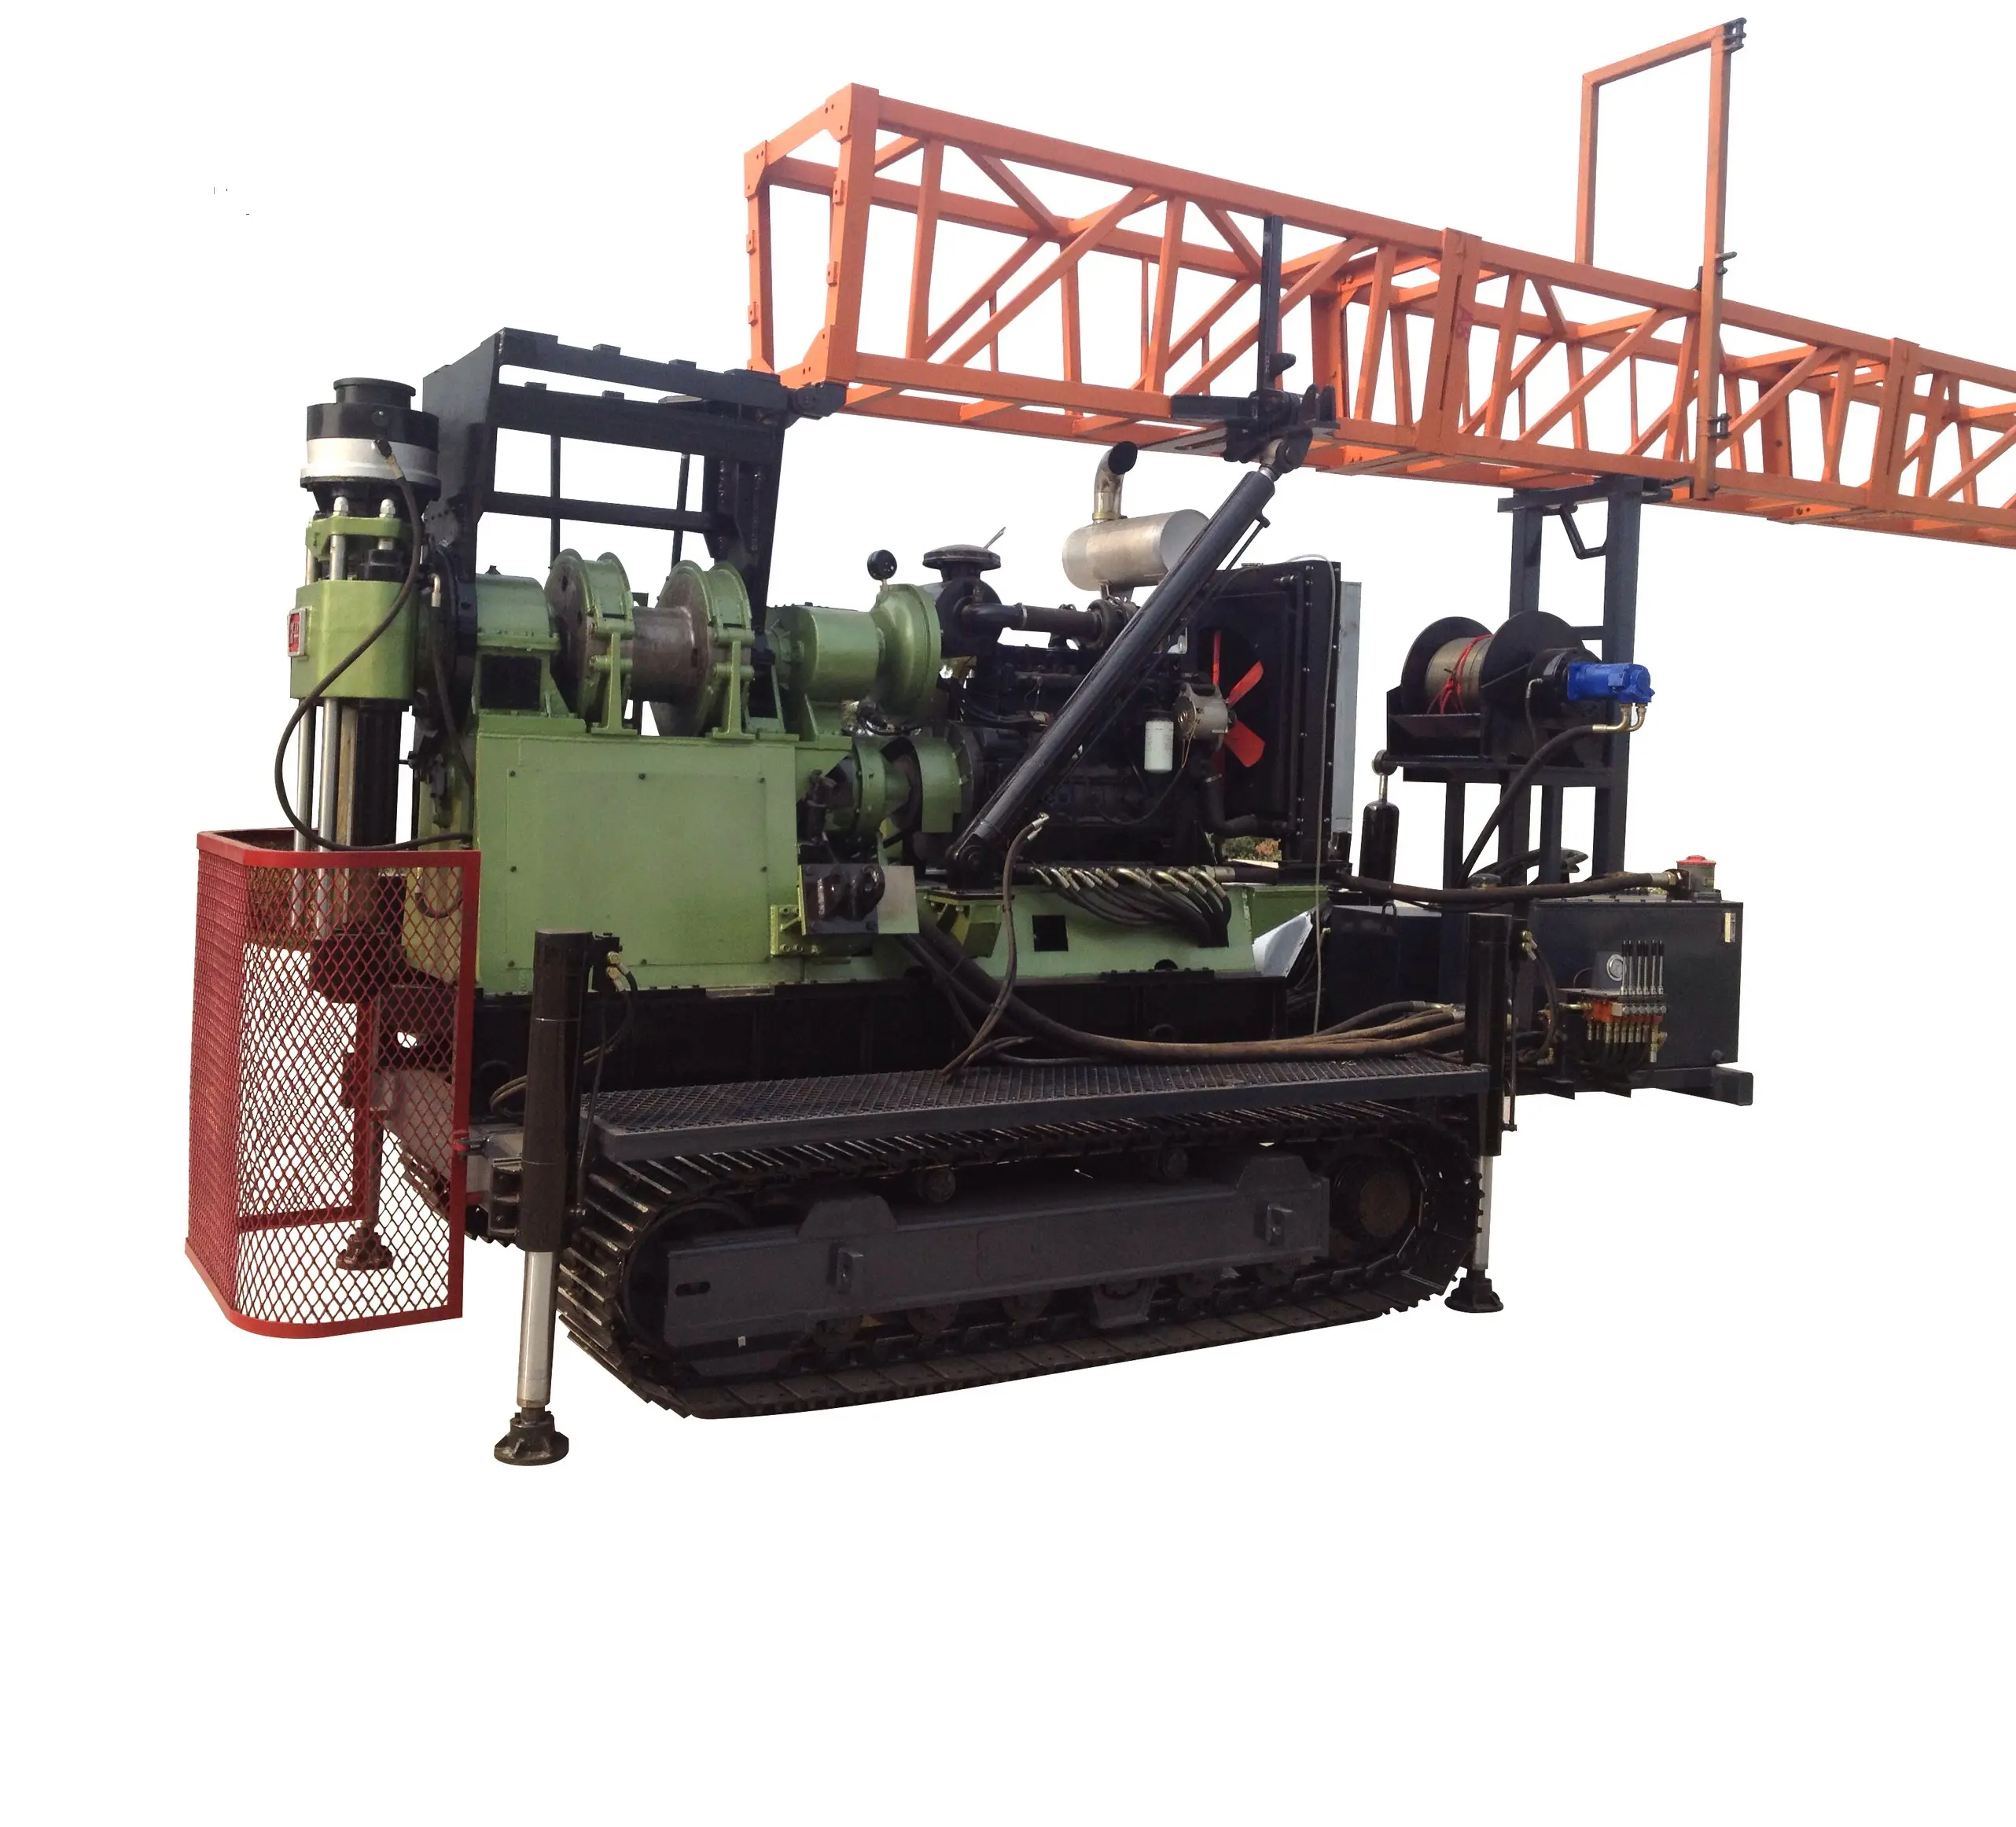 HXY-4TL Portable Crawler Solid Mine Exploration Bore Hole Core Drilling Rig Machine for Mining Geological Prospecting